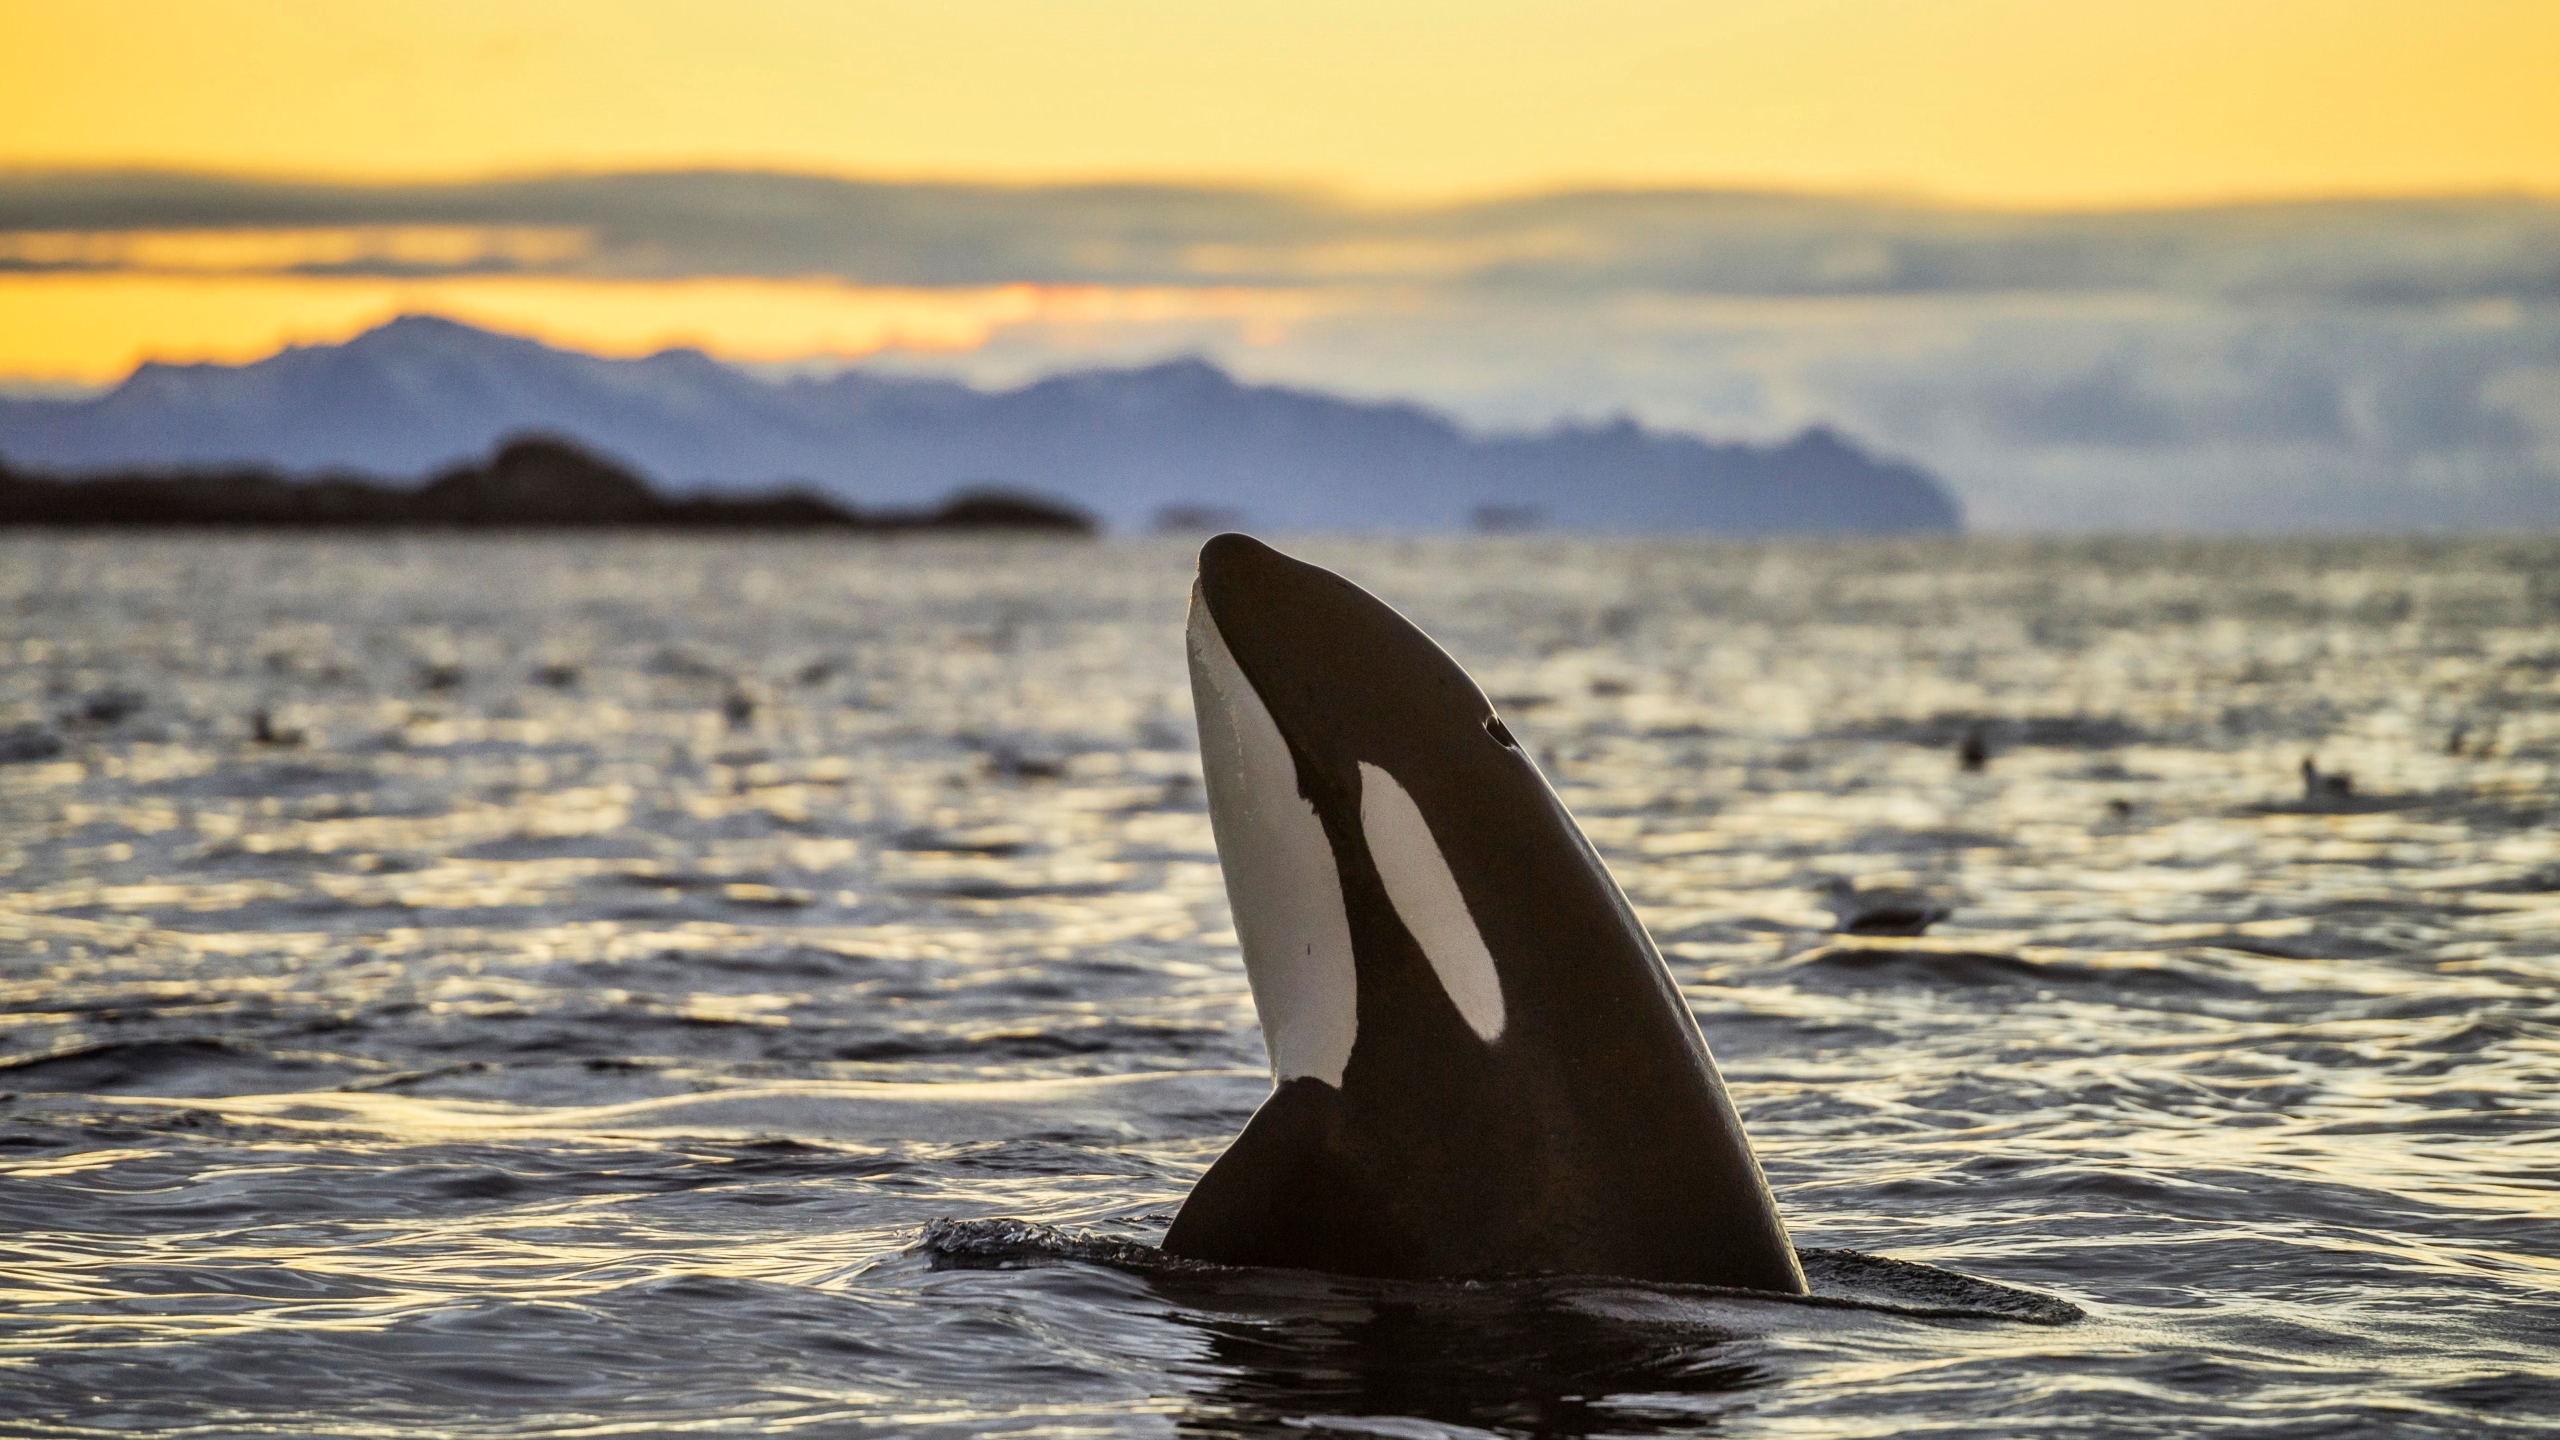 The Orcas of Europe are destroying boat rudders